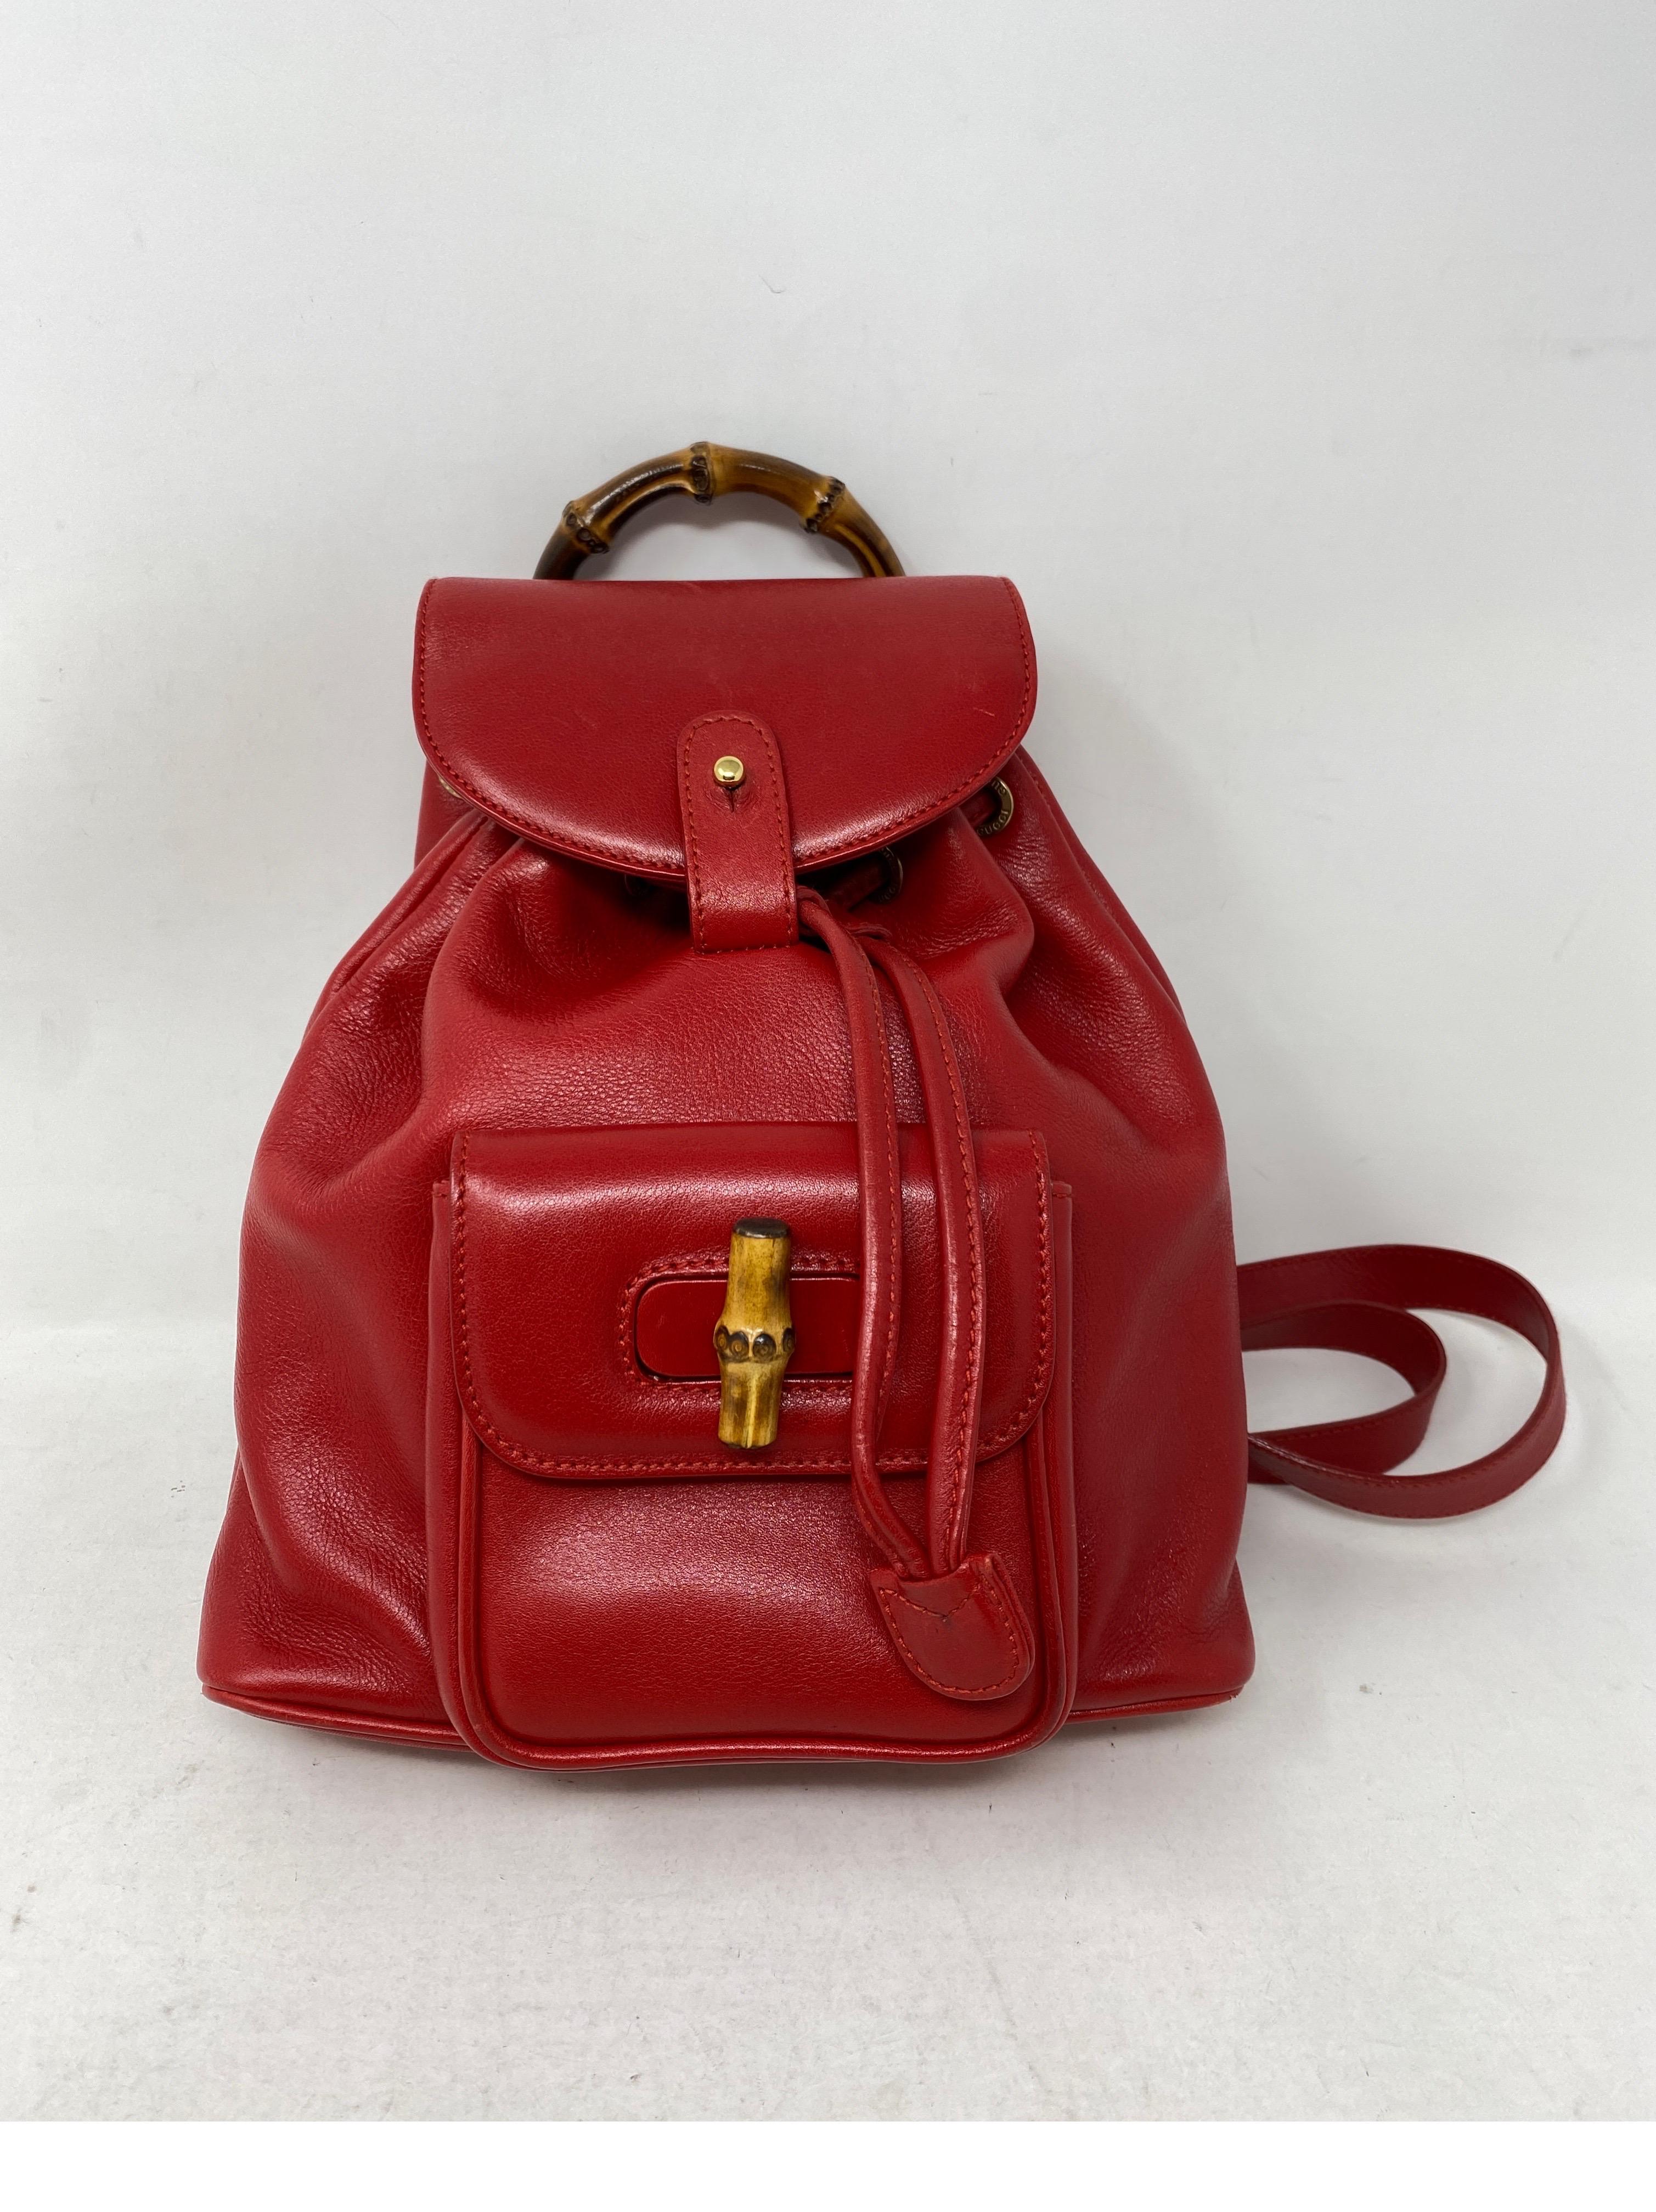 Gucci Red Leather Backpack. Bamboo closure and handle. Red leather small backpack. Excellent condition. Clean interior. Guaranteed authentic. 